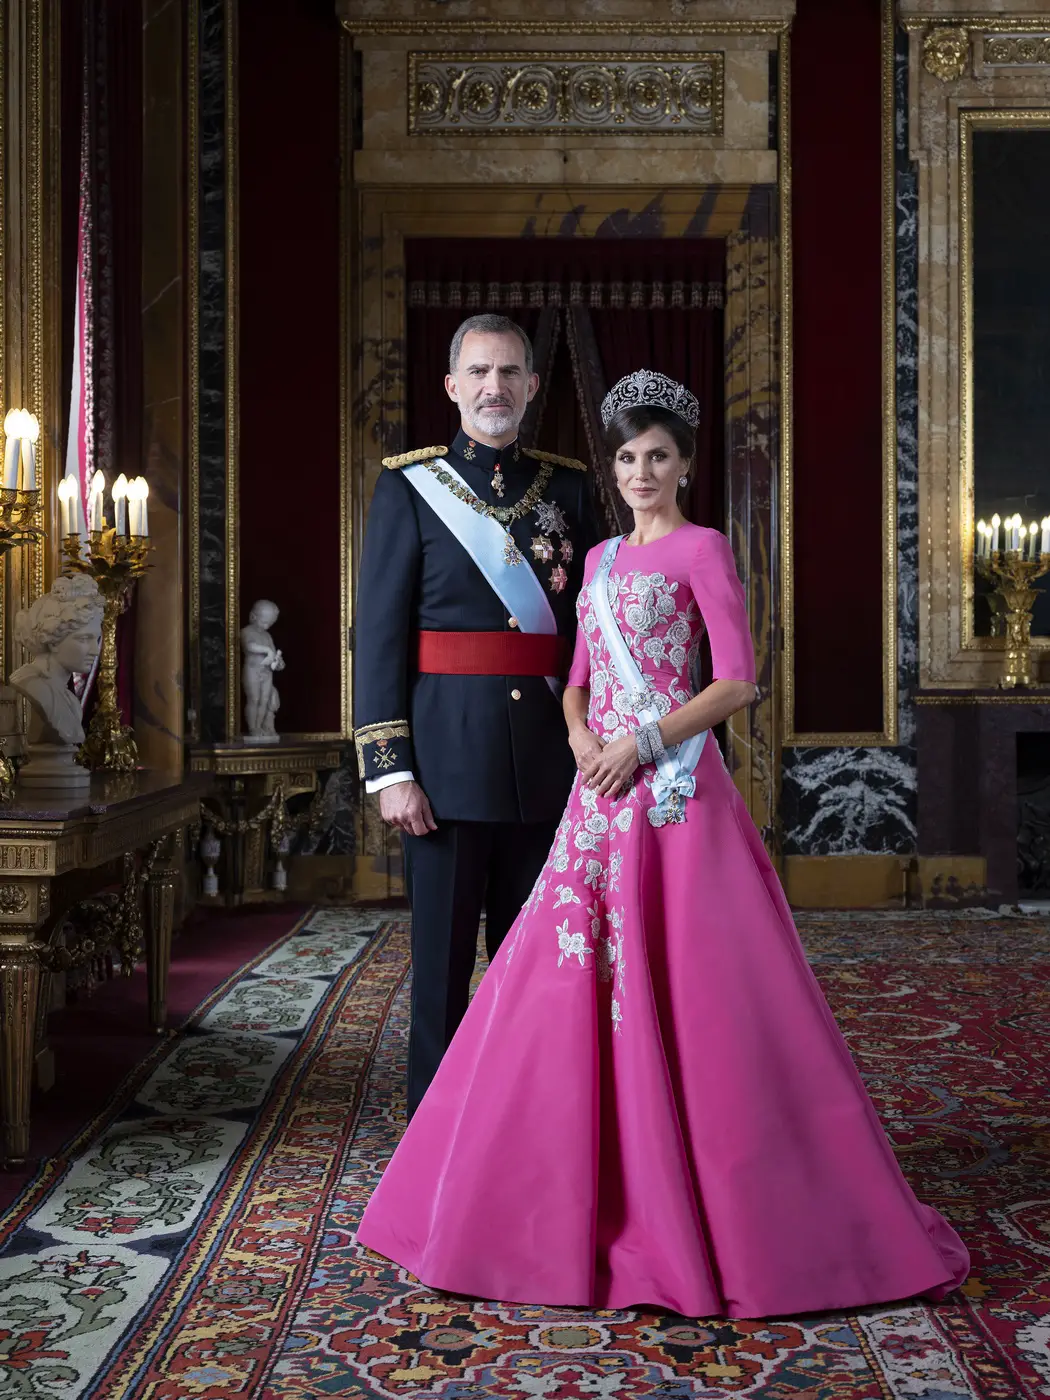 King Felipe and Queen Letizia's official portraits released by the palace